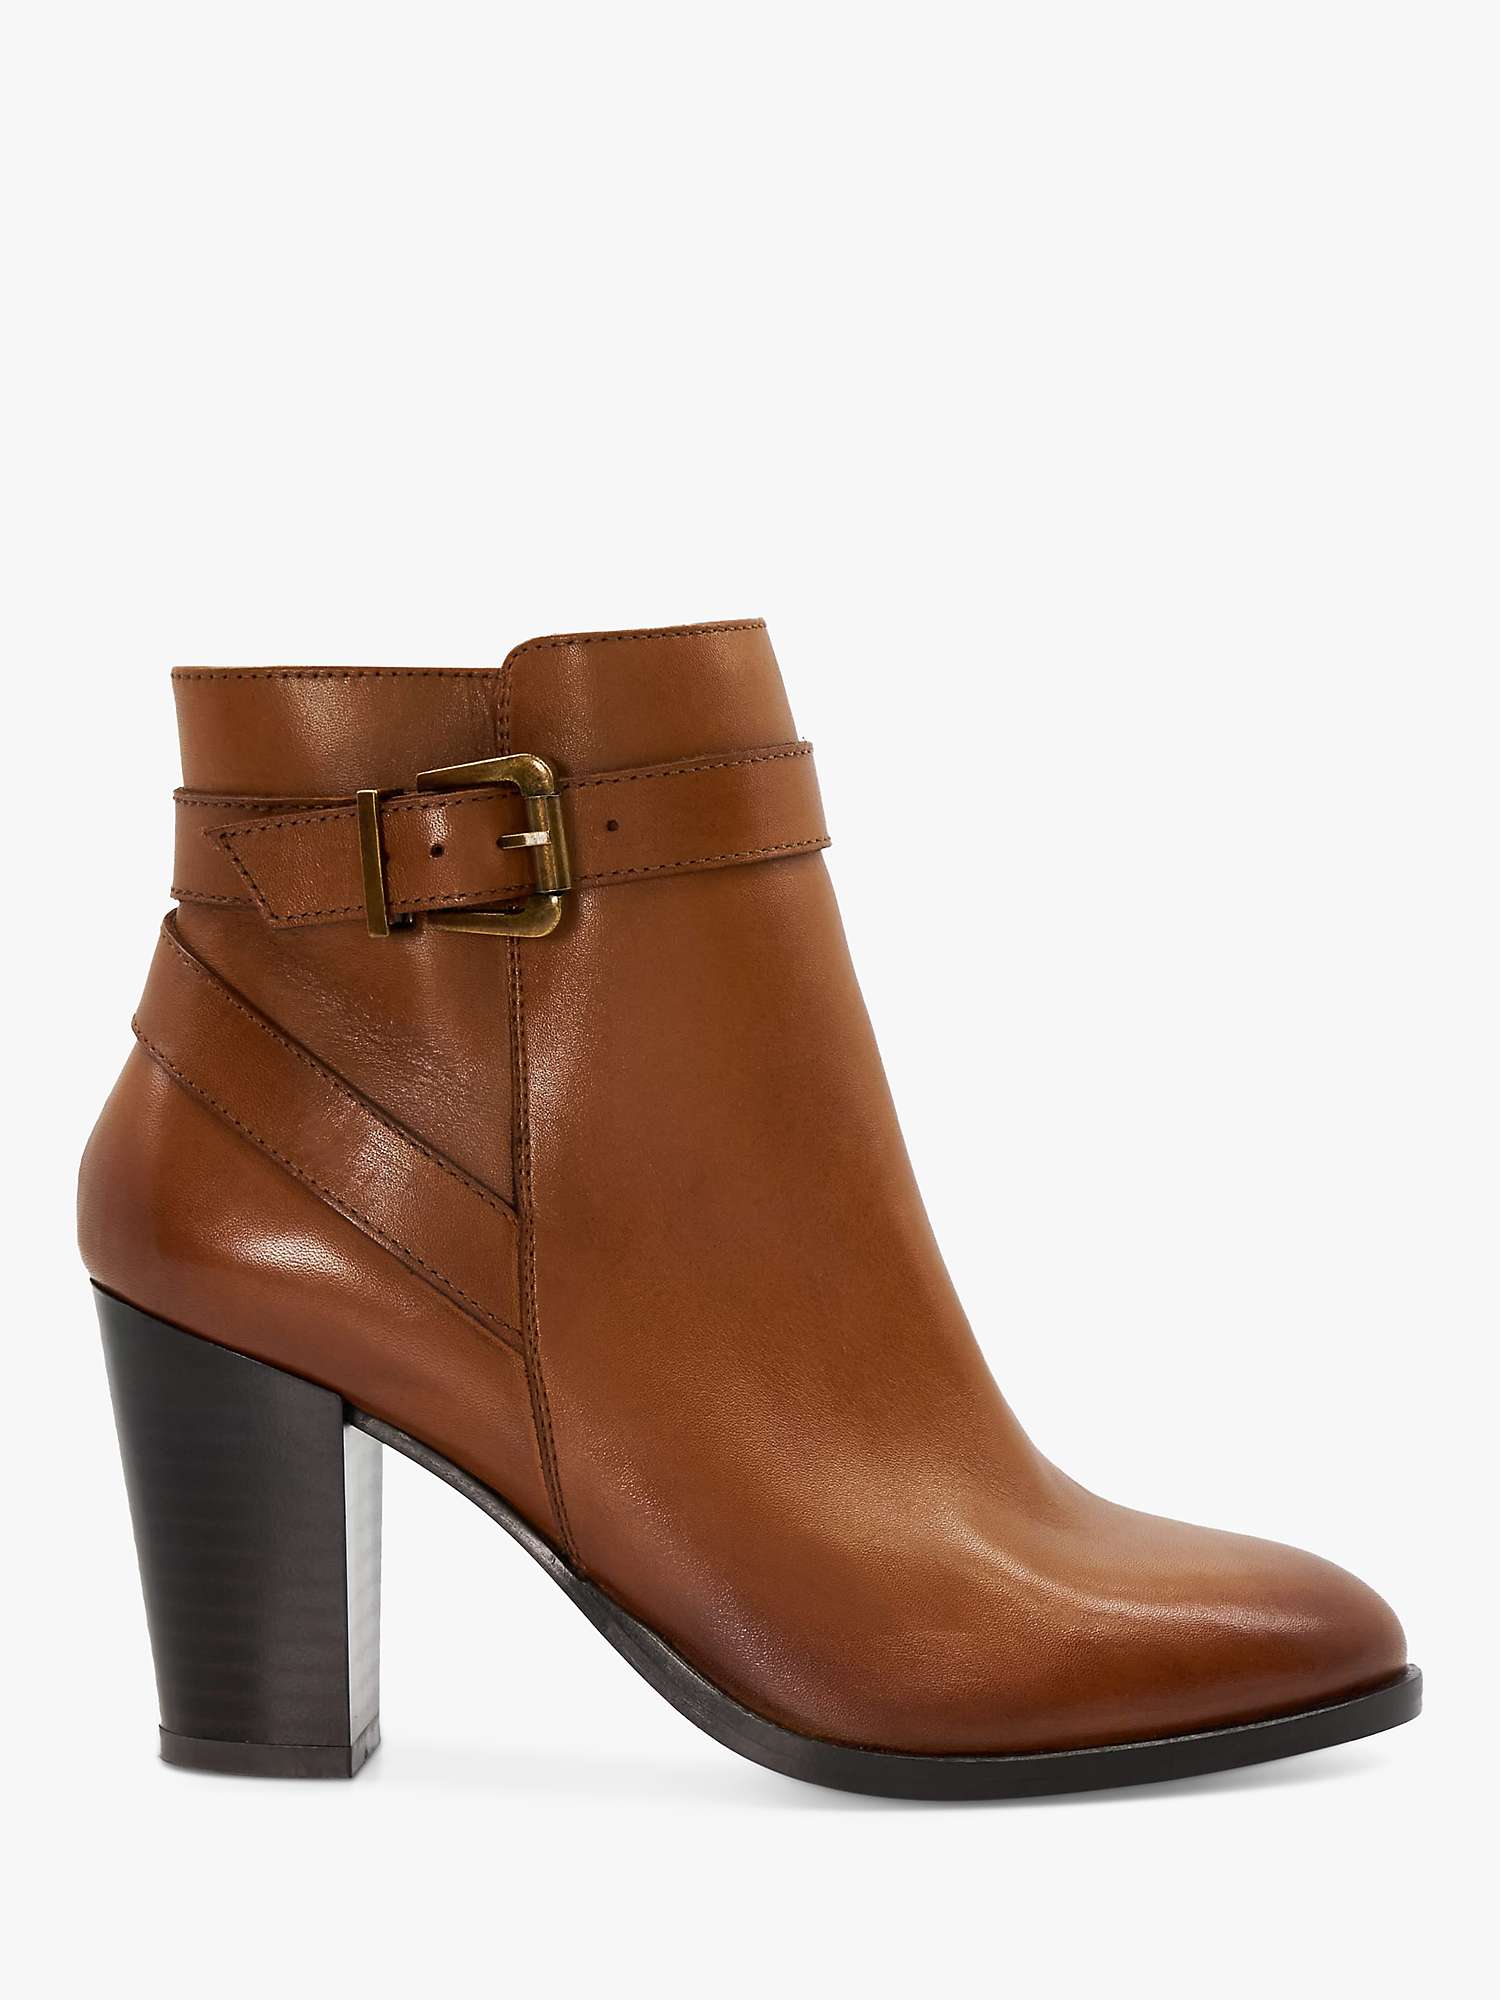 Buy Dune Philippa 2 Leather Block Heel Ankle Boots Online at johnlewis.com